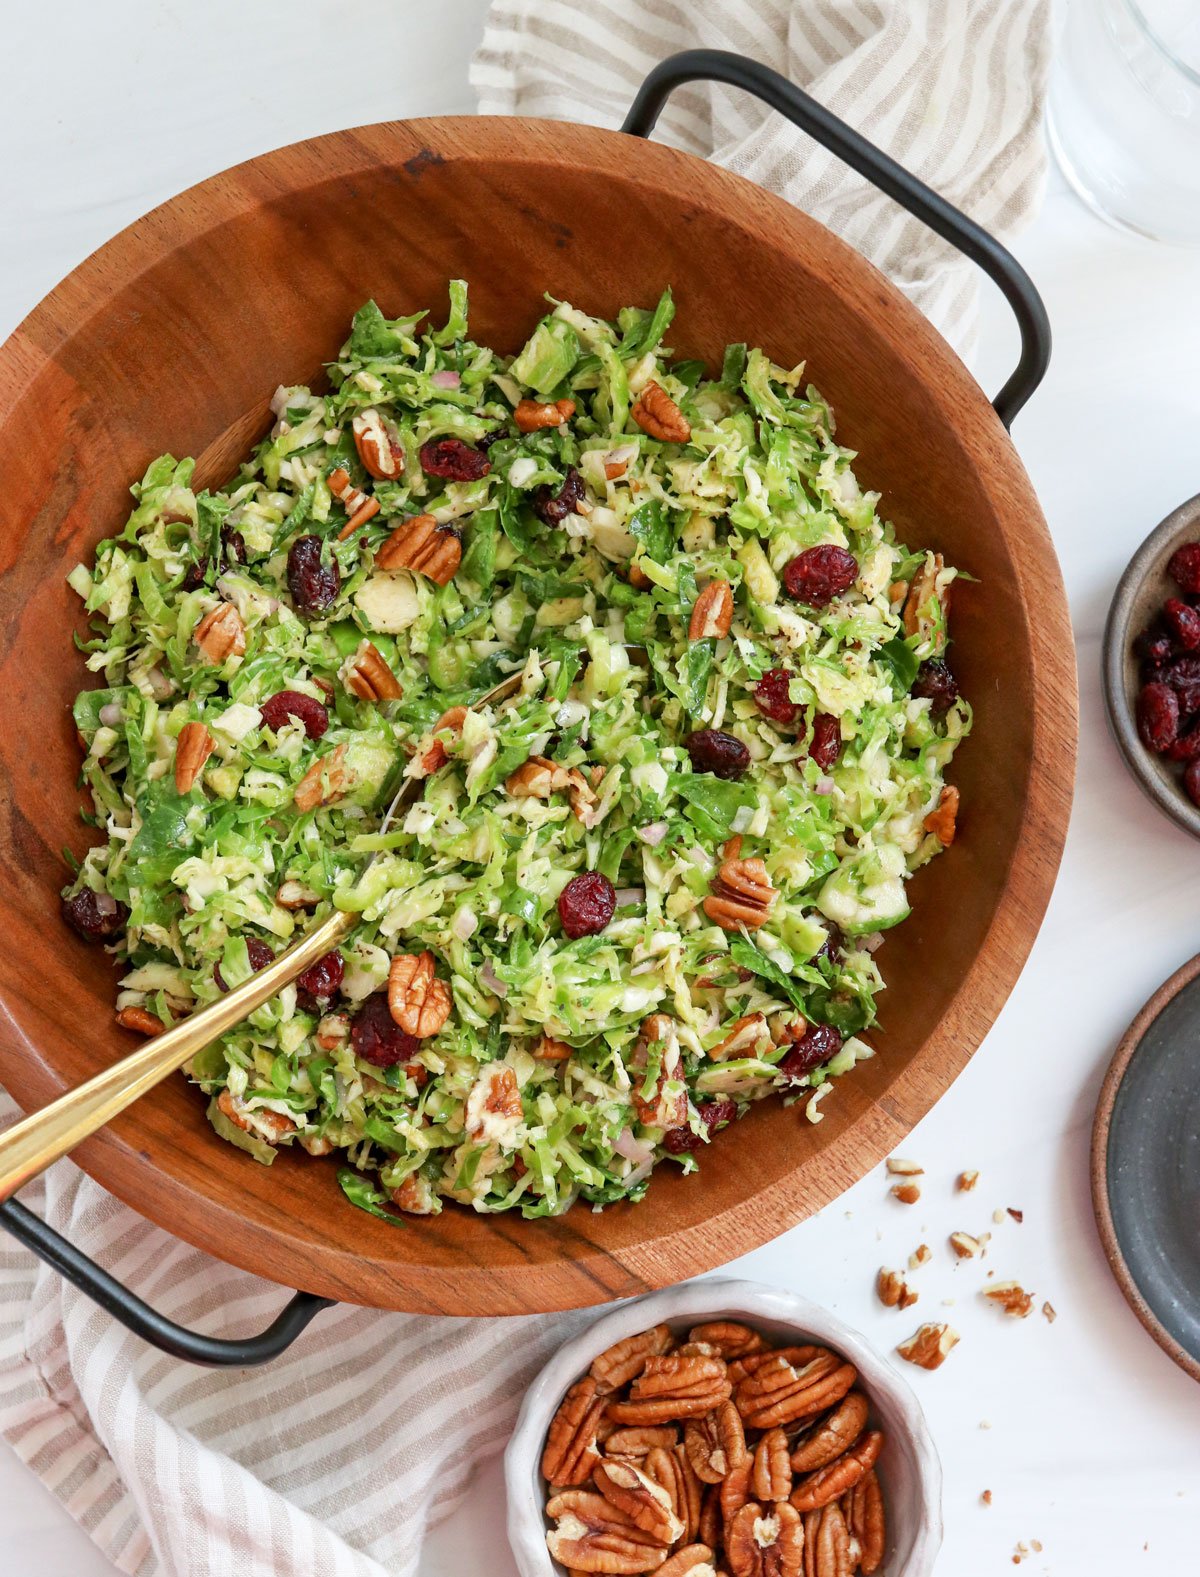 shredded brussels sprouts salad overhead in serving bowl